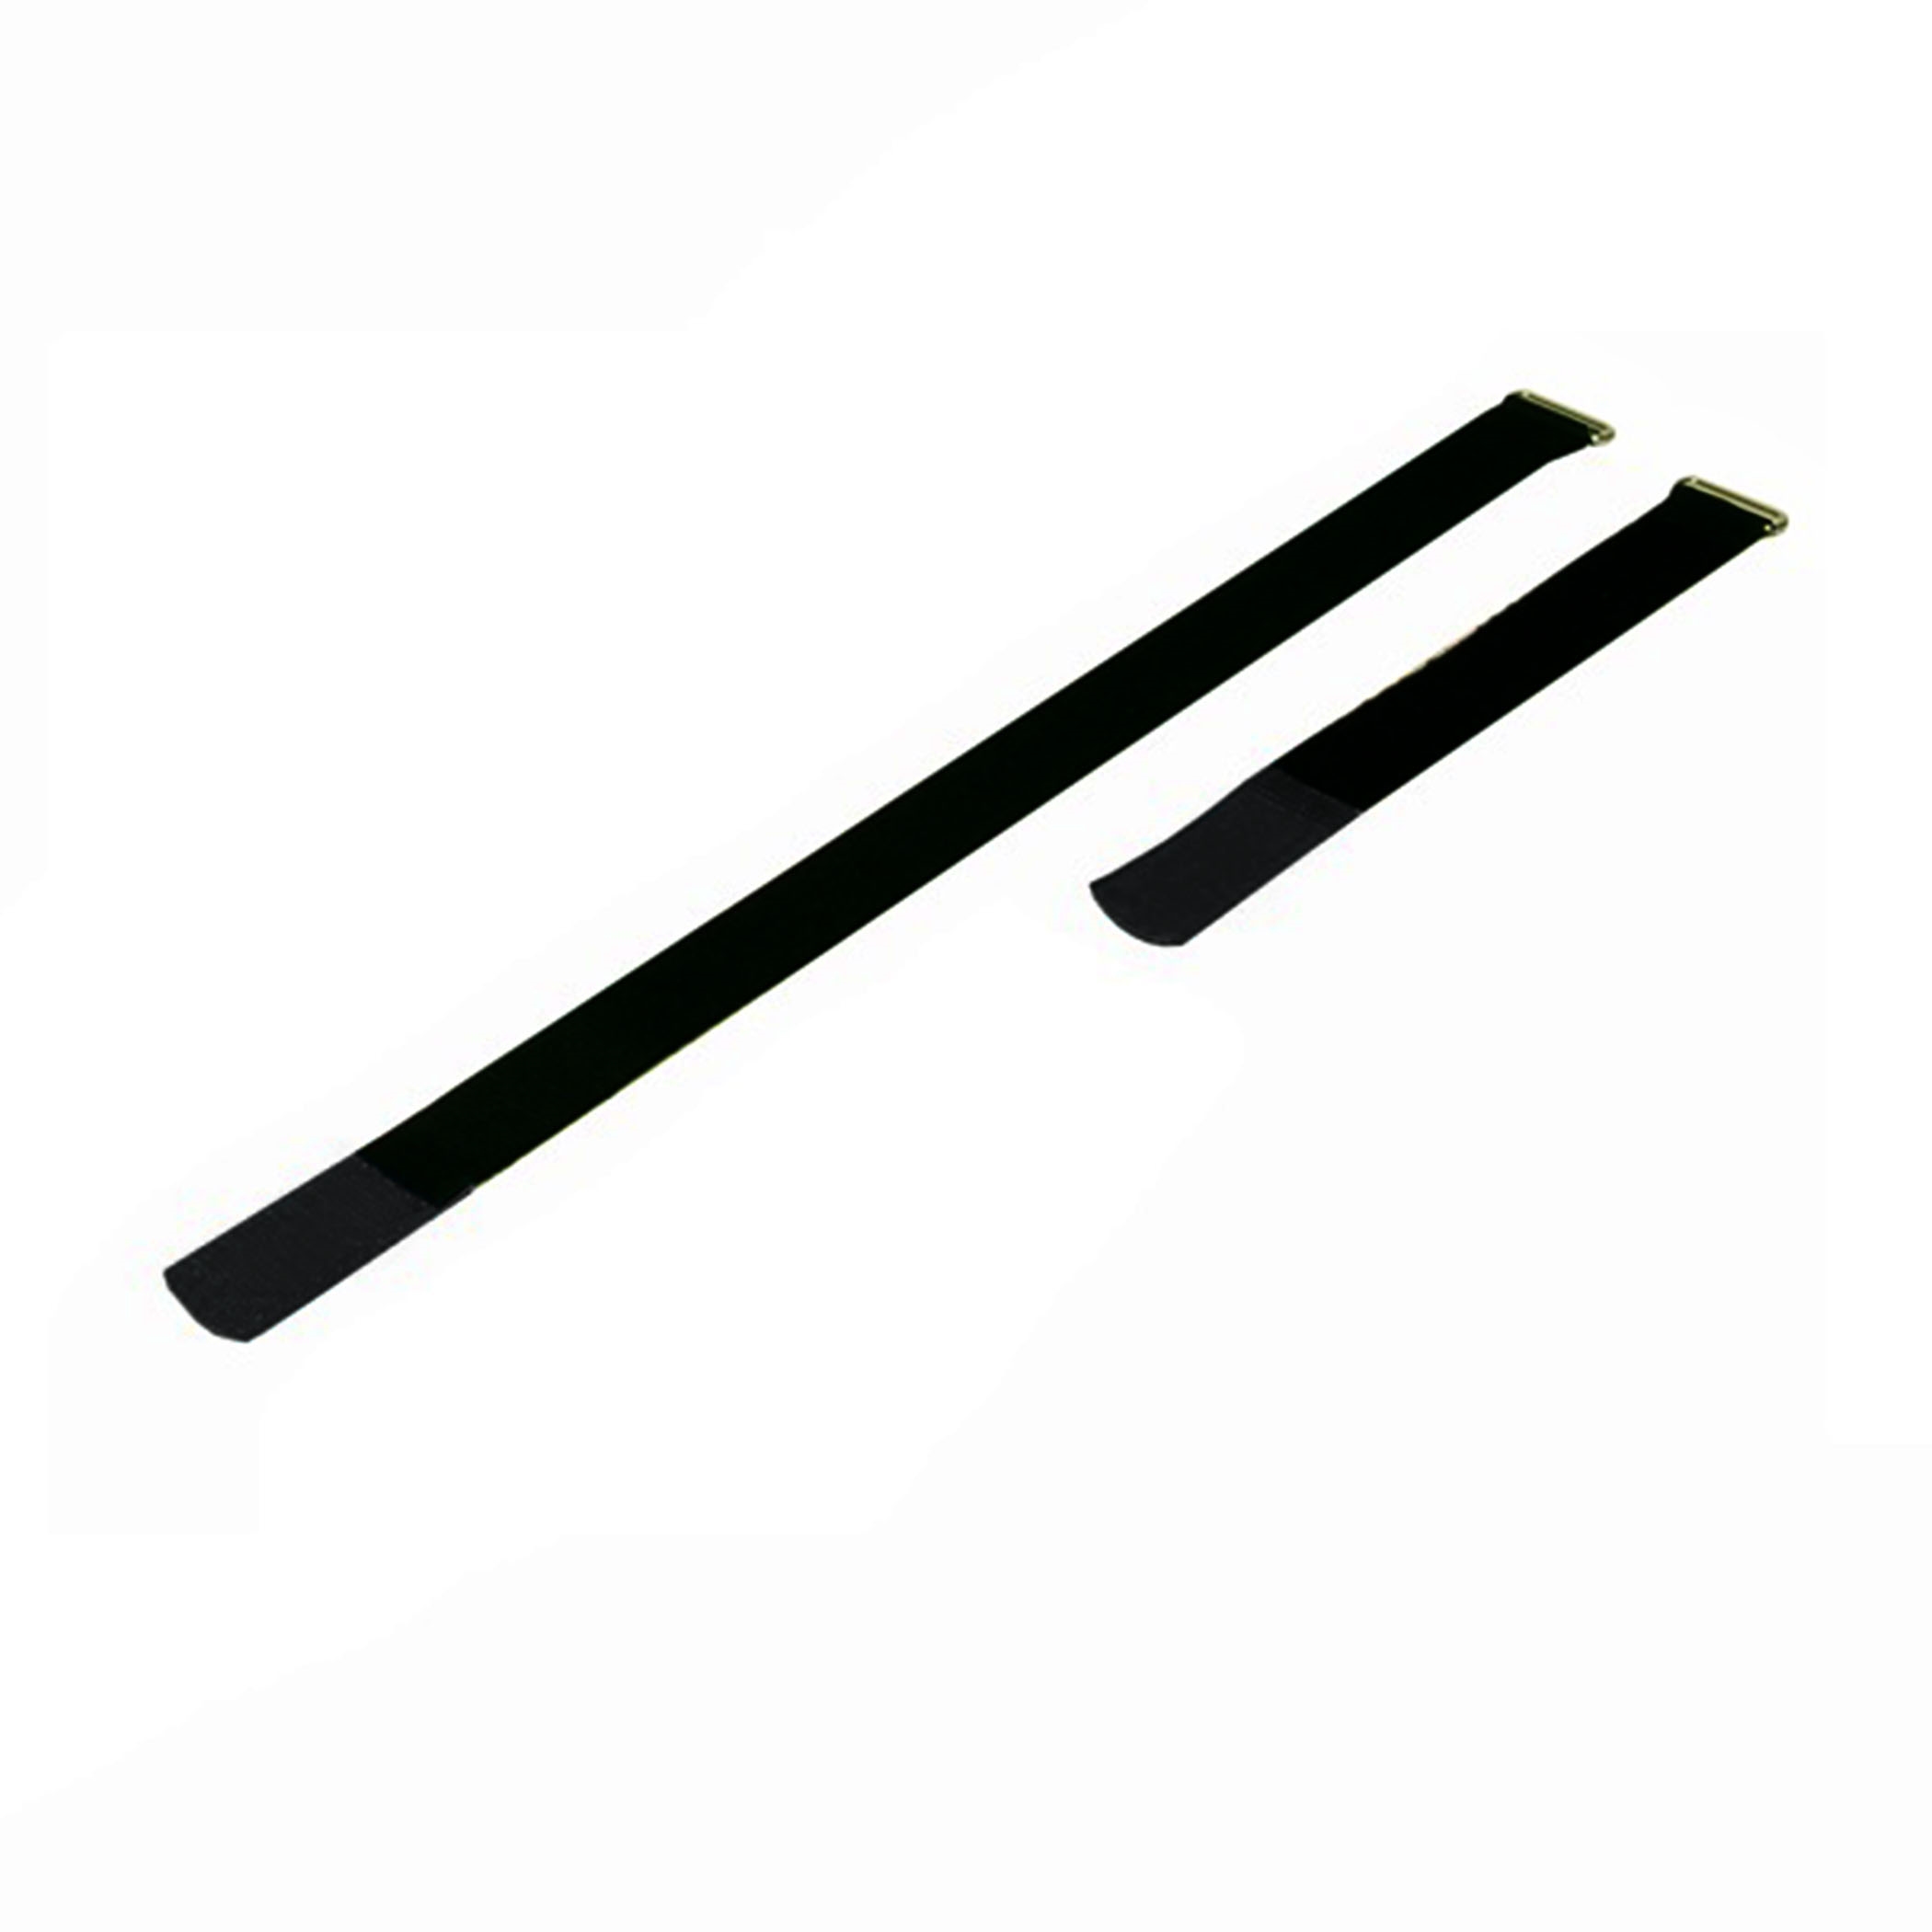 Cable Tie 300x25mm with Hook Black, (10 pieces) - a2530-500h